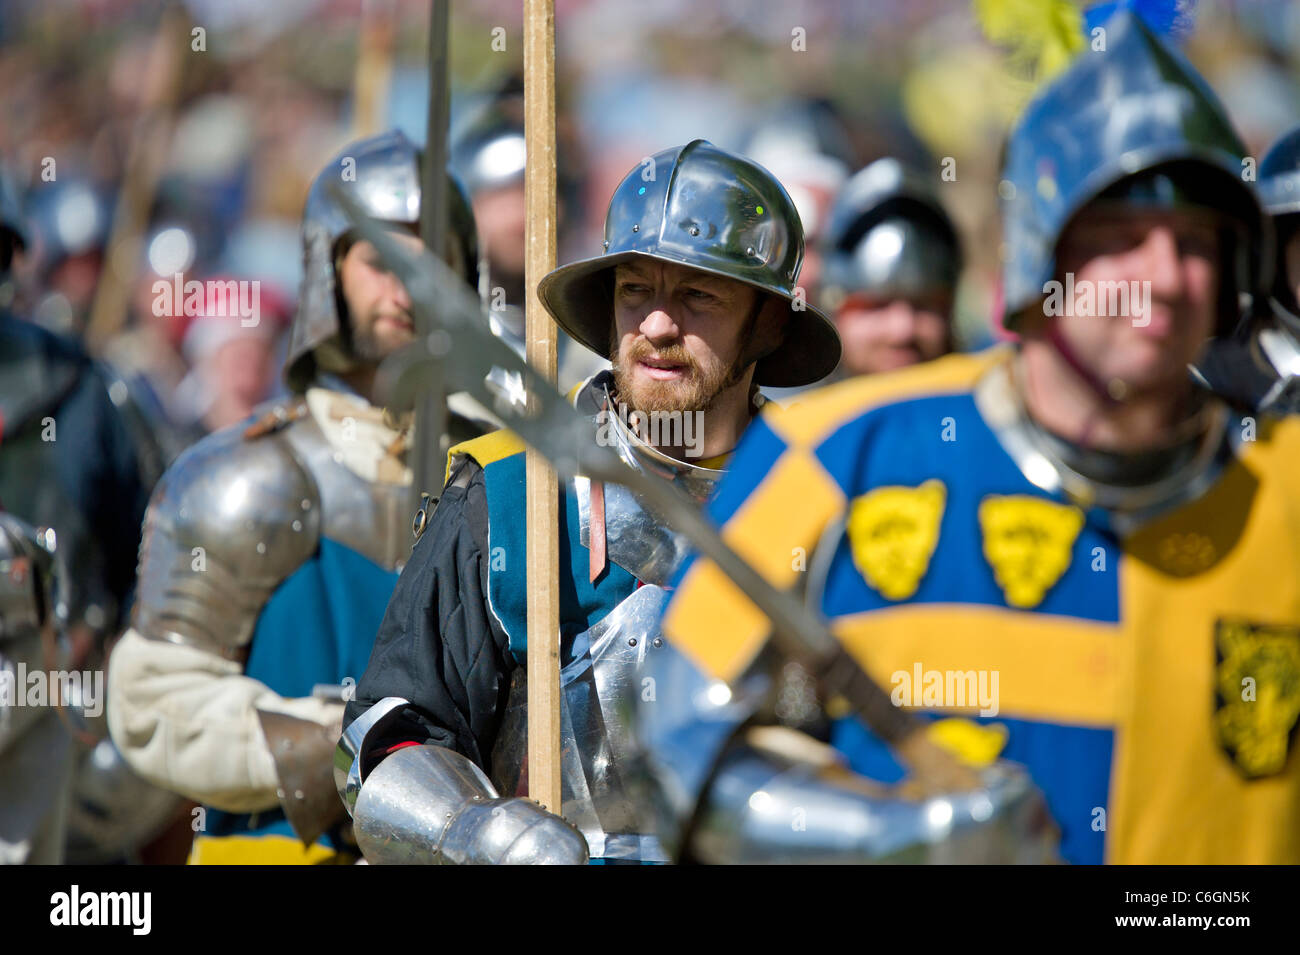 Re-enactors dressed as medieval knights and men-at-arms parade at the Medieval Festival held at Herstmonceux castle in Sussex UK Stock Photo